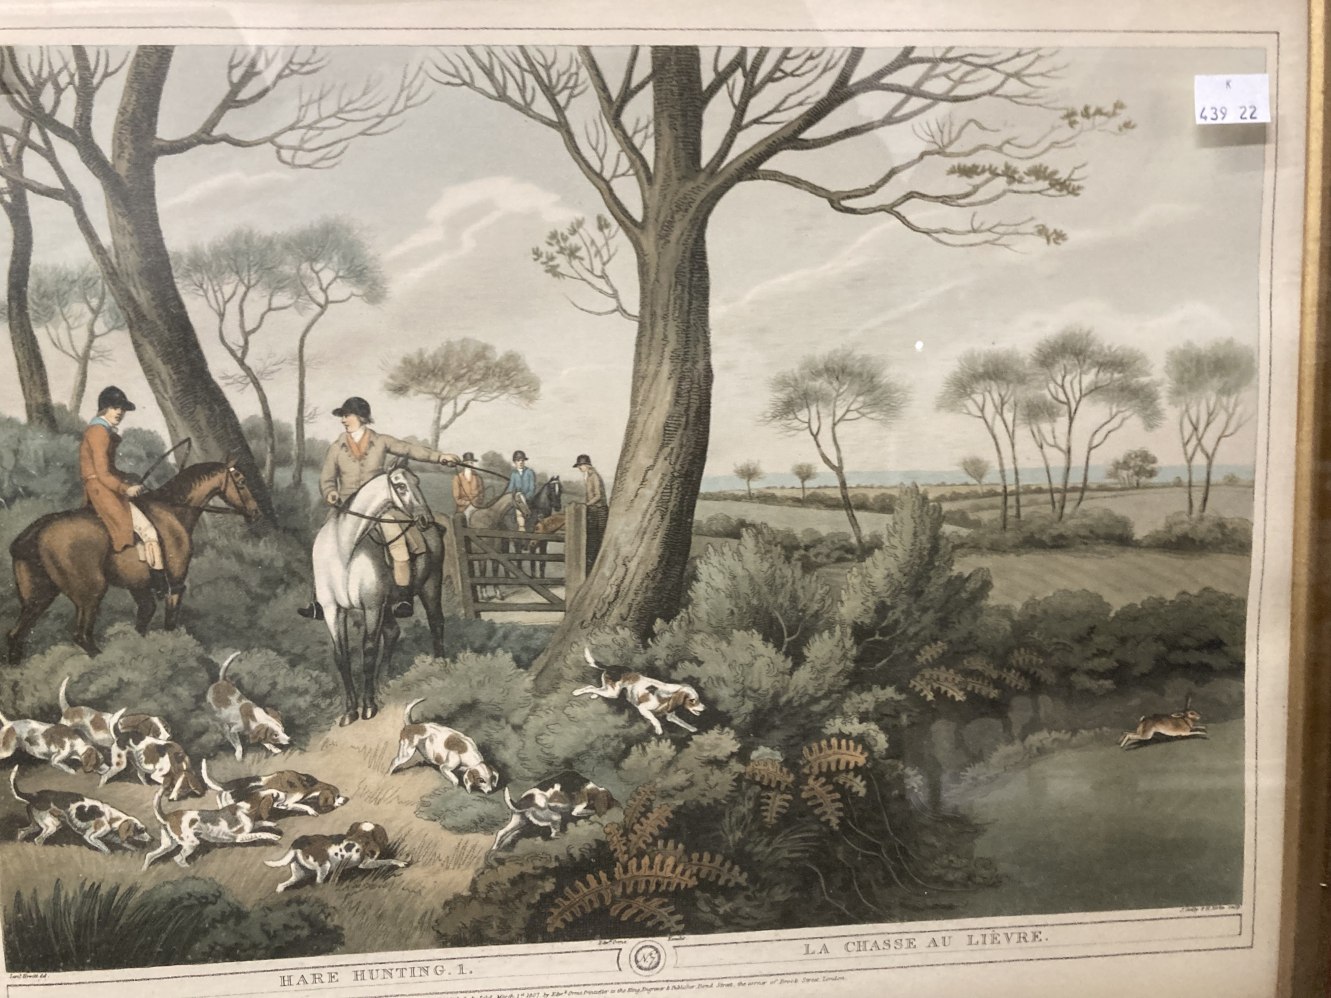 19th cent. French/English Hunting Prints: 'Hare Hunting' 1 and 2 published by Edward Orme, Bond - Image 2 of 4